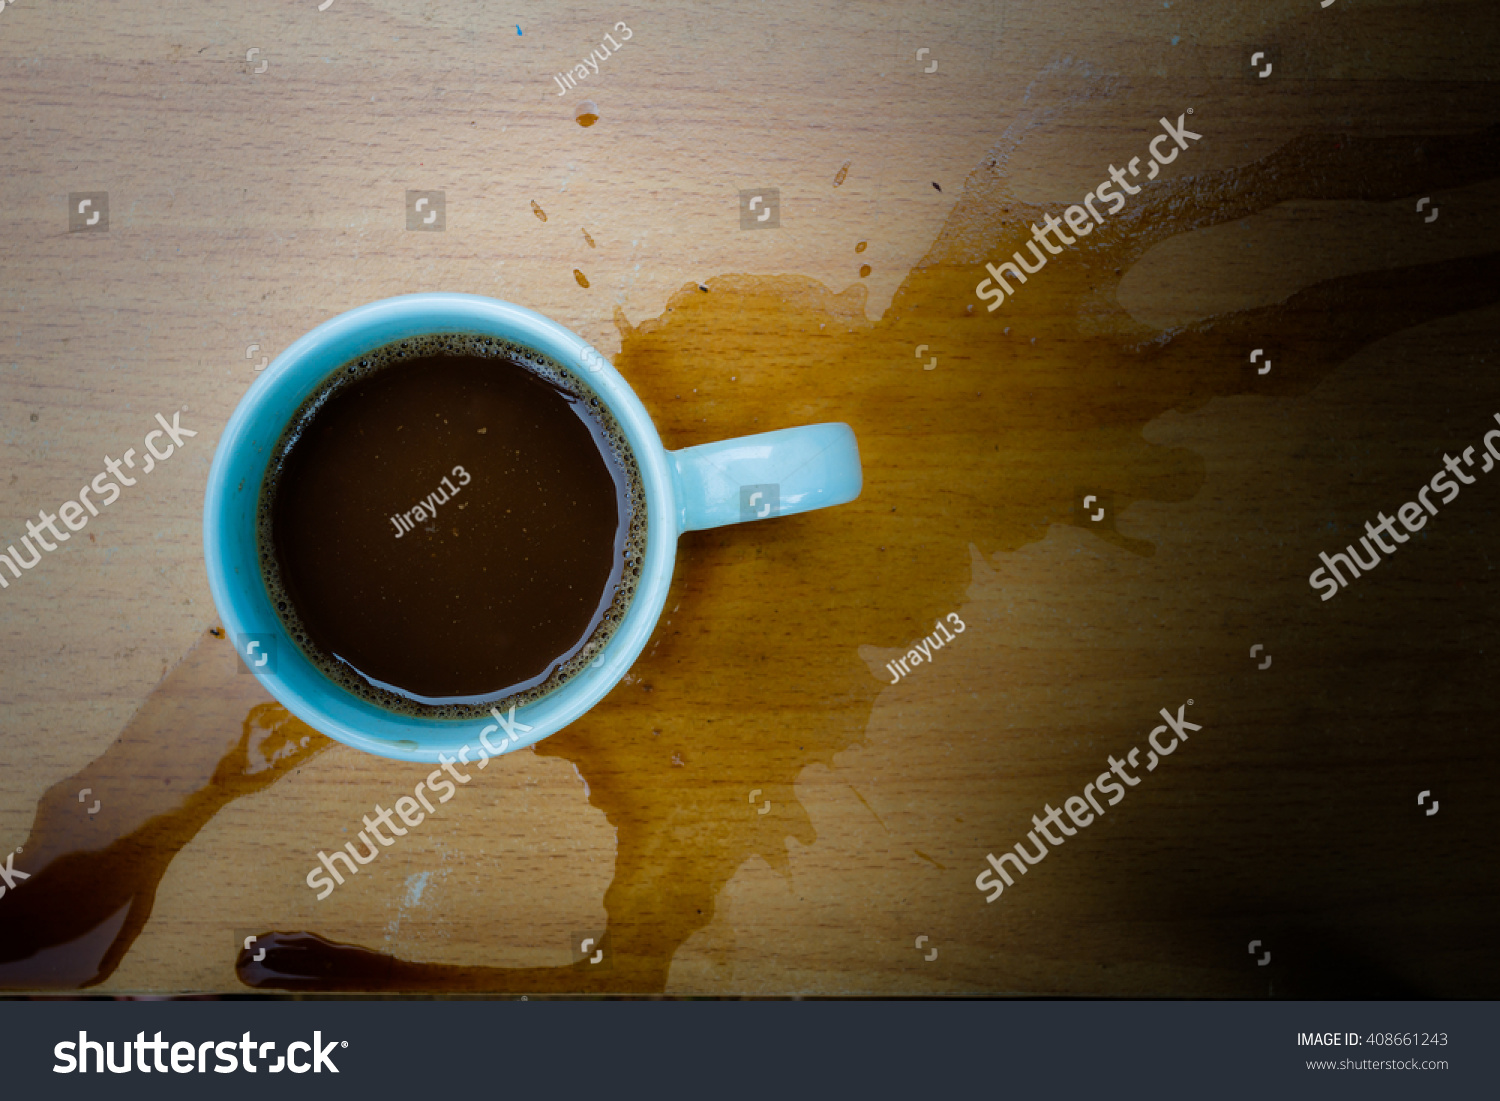 Still life cup of coffee spilled out on wooden desk #408661243